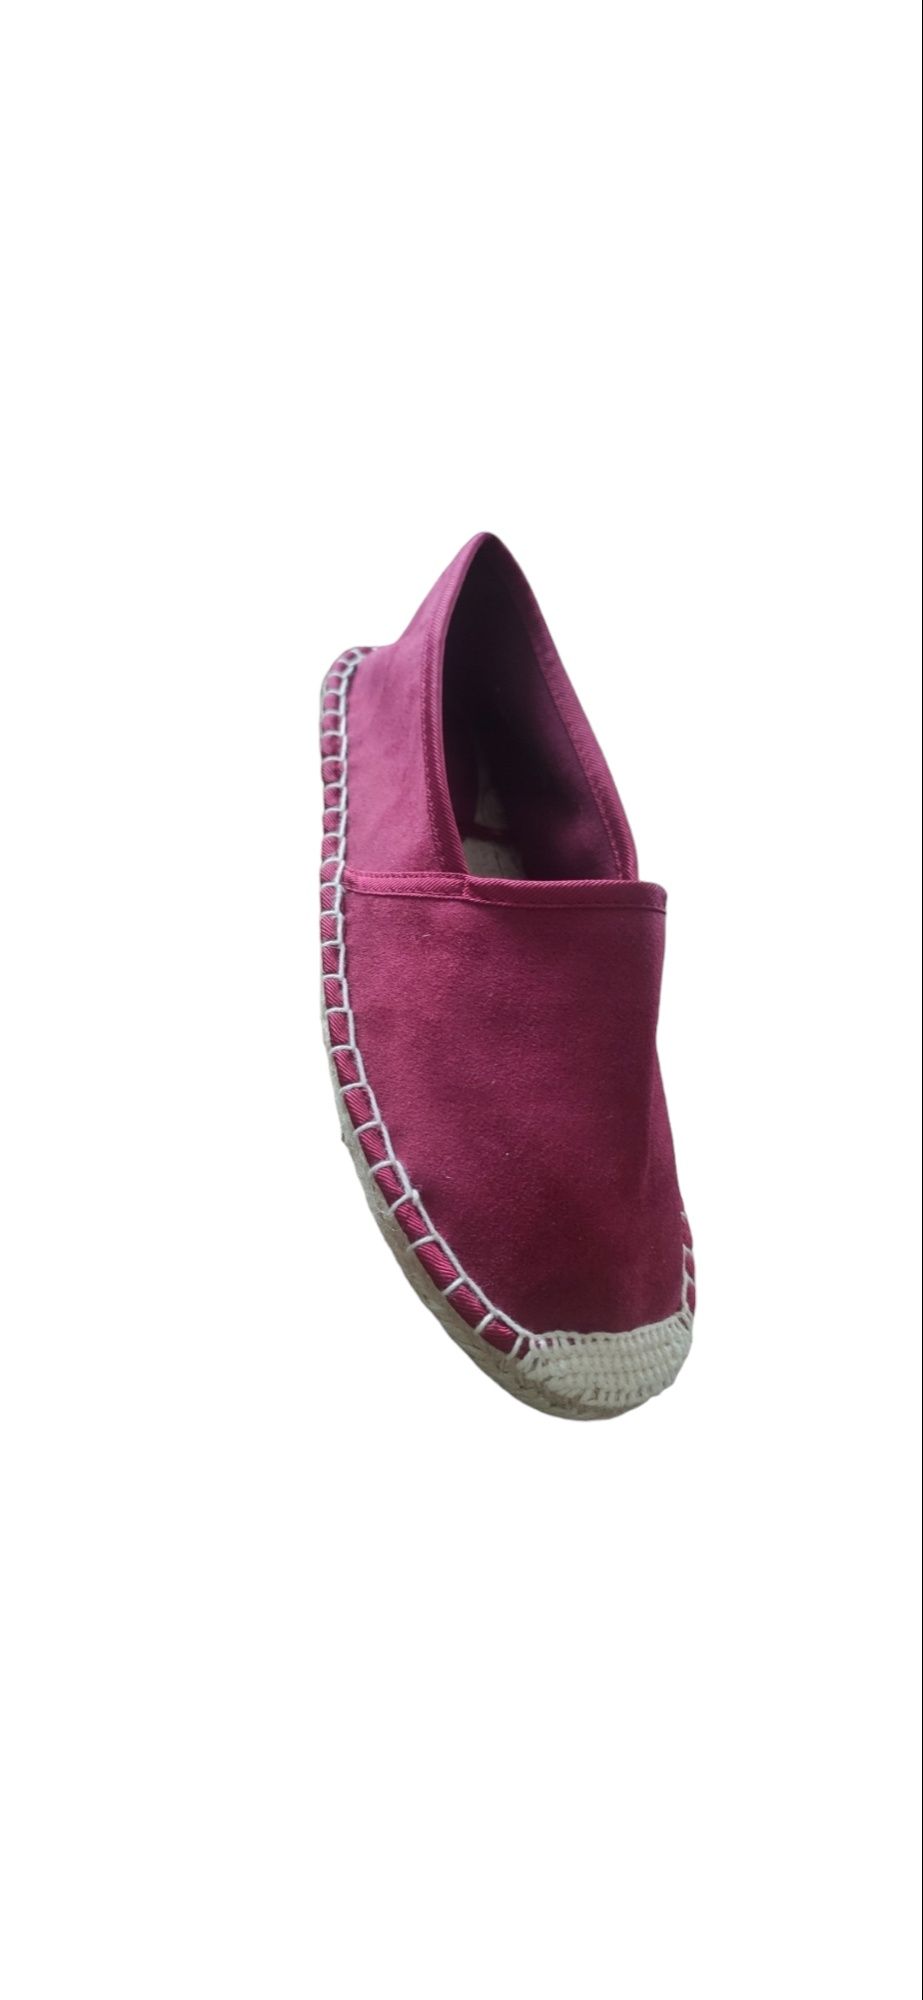 Baleriny NLY SHOES r.37